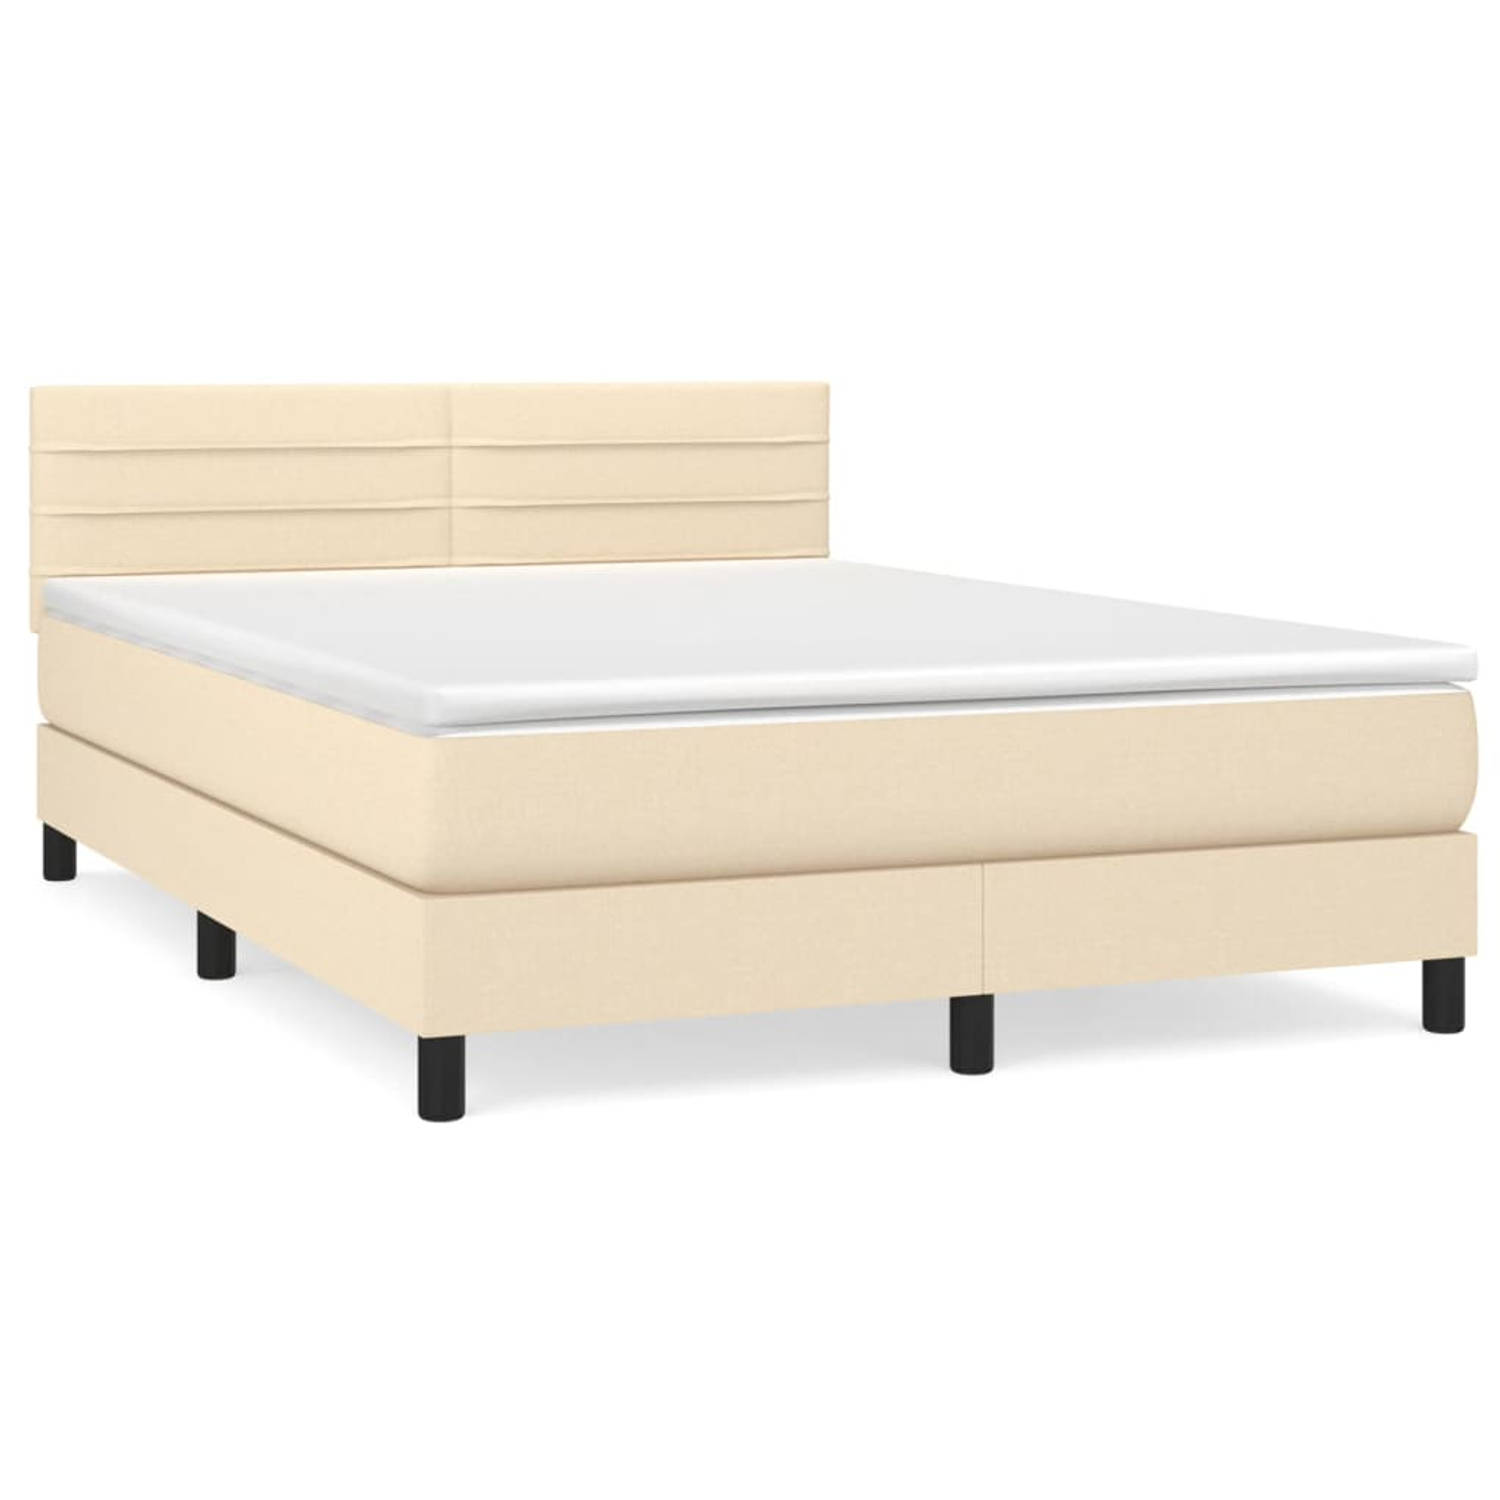 The Living Store Boxspringbed - Comfort - Bed - 203x144x78/88cm - Crème